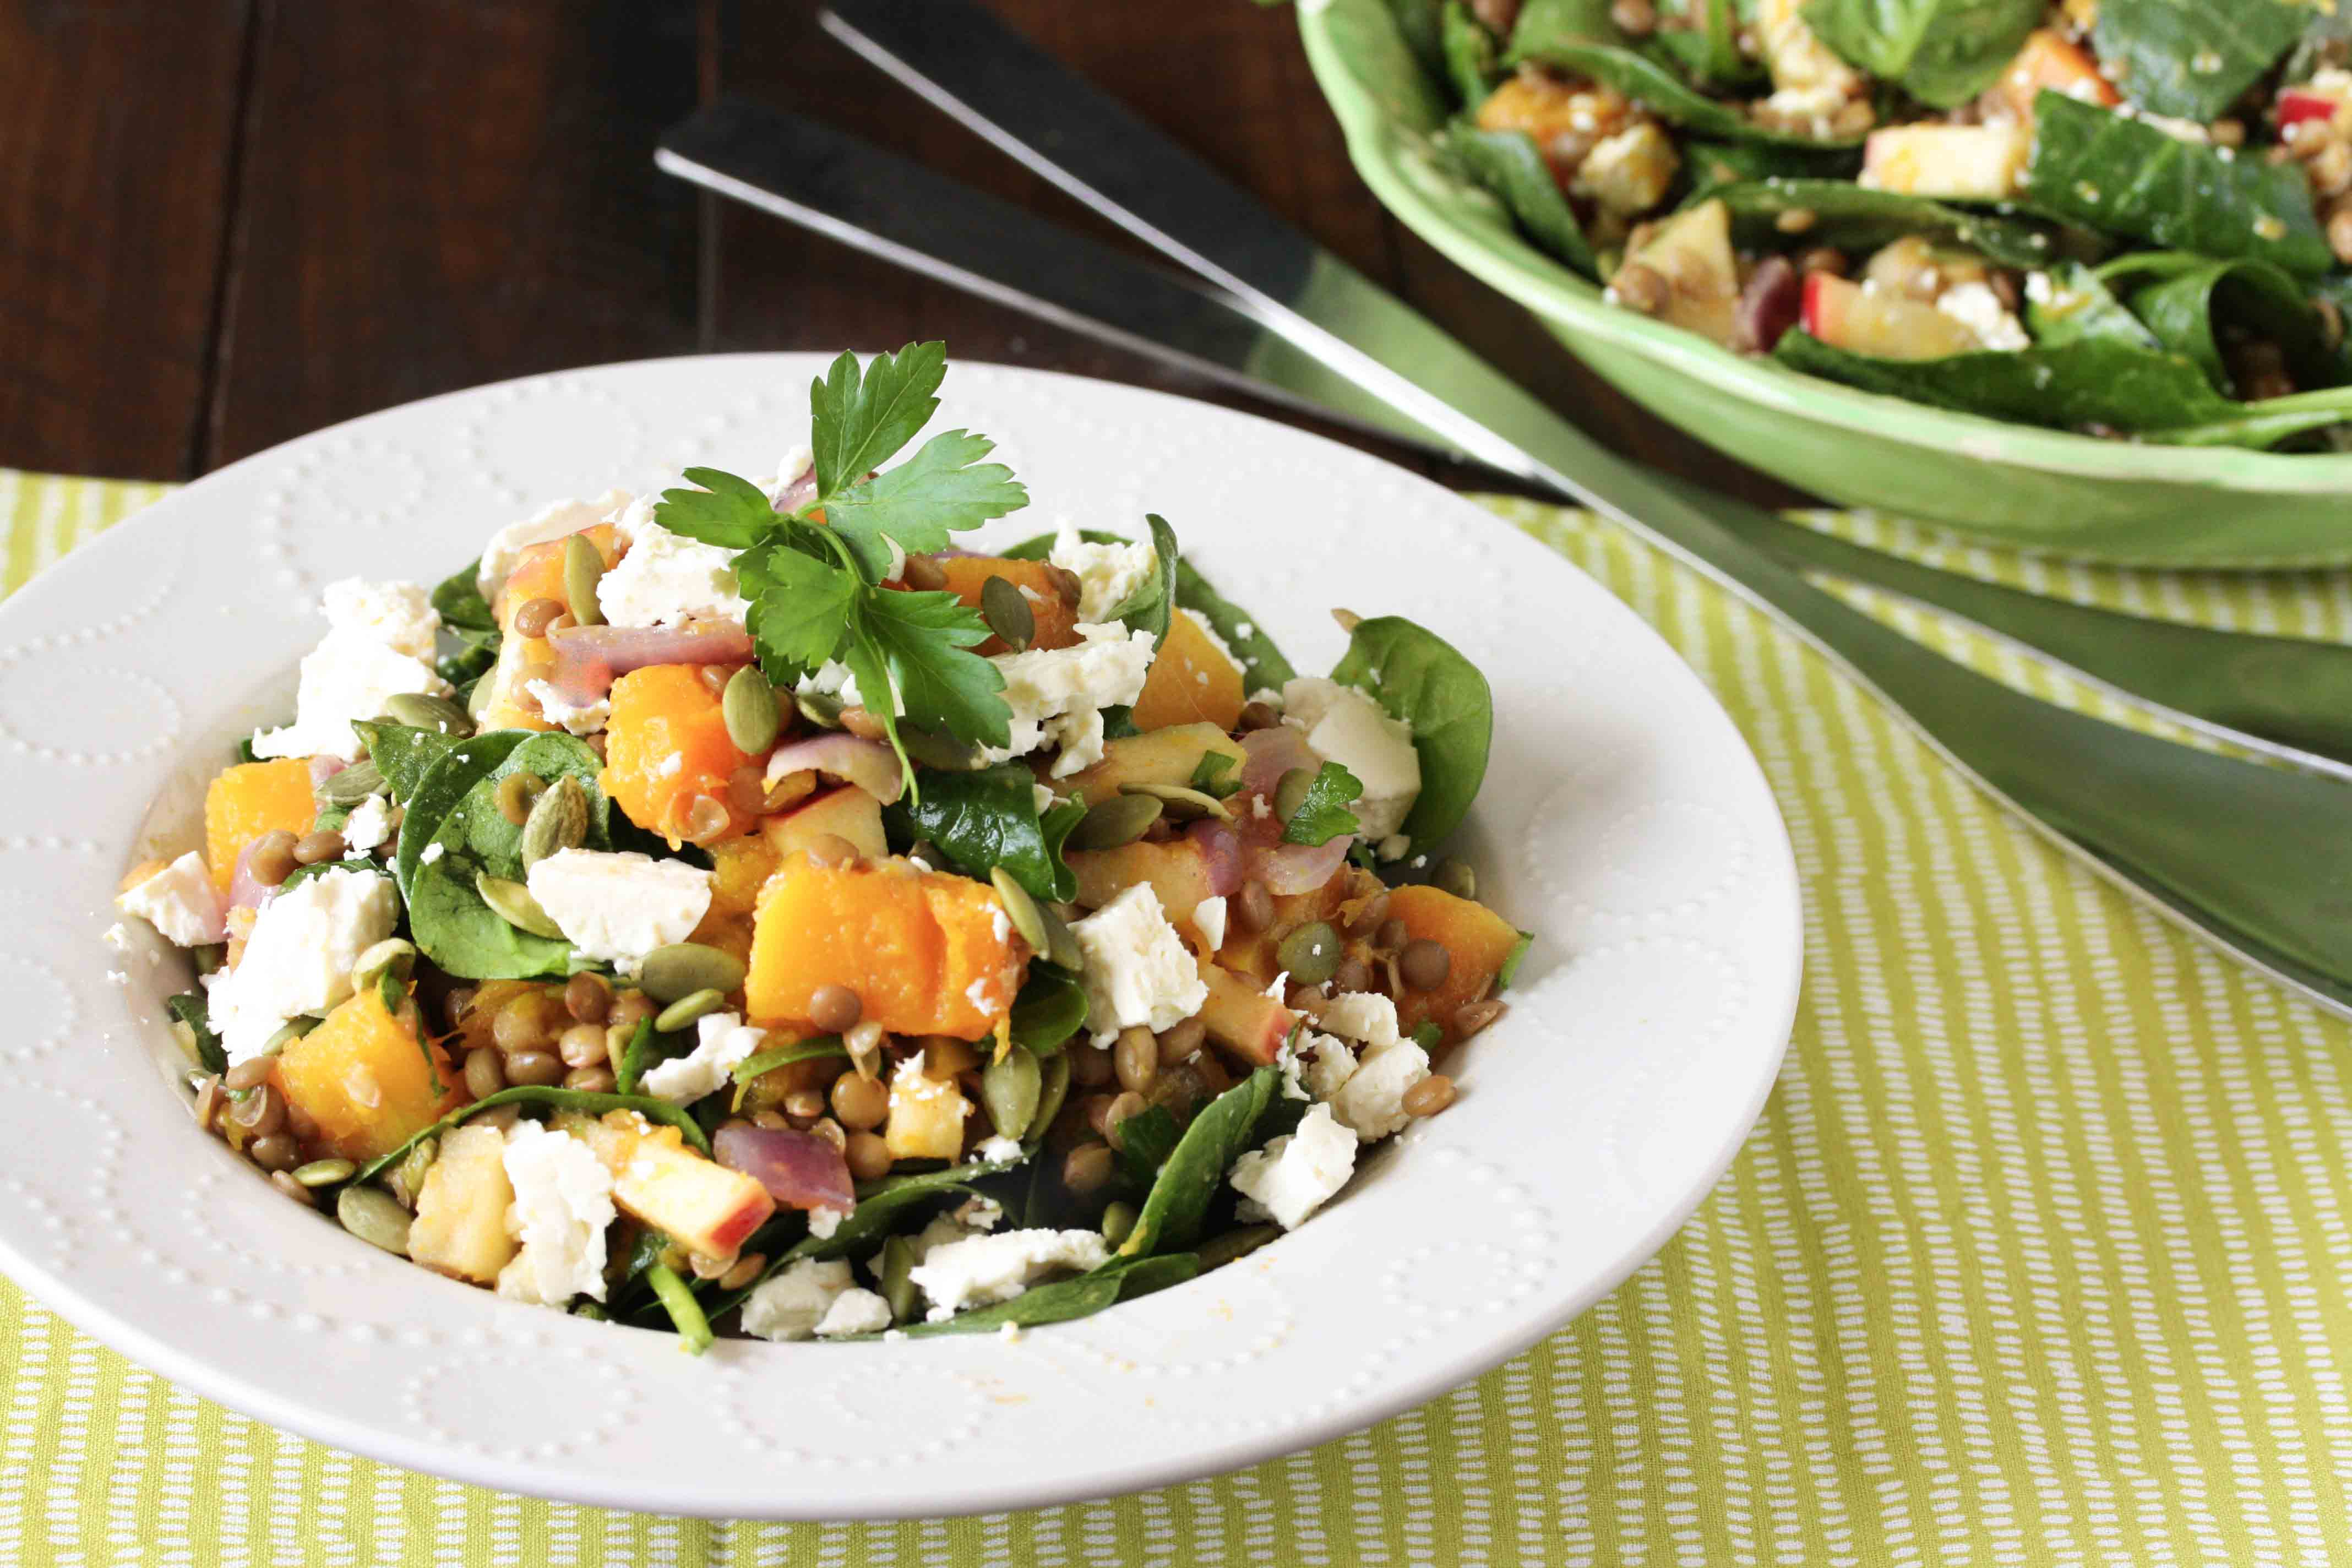 Pumpkin, apple and lentil salad with baby spinach and feta